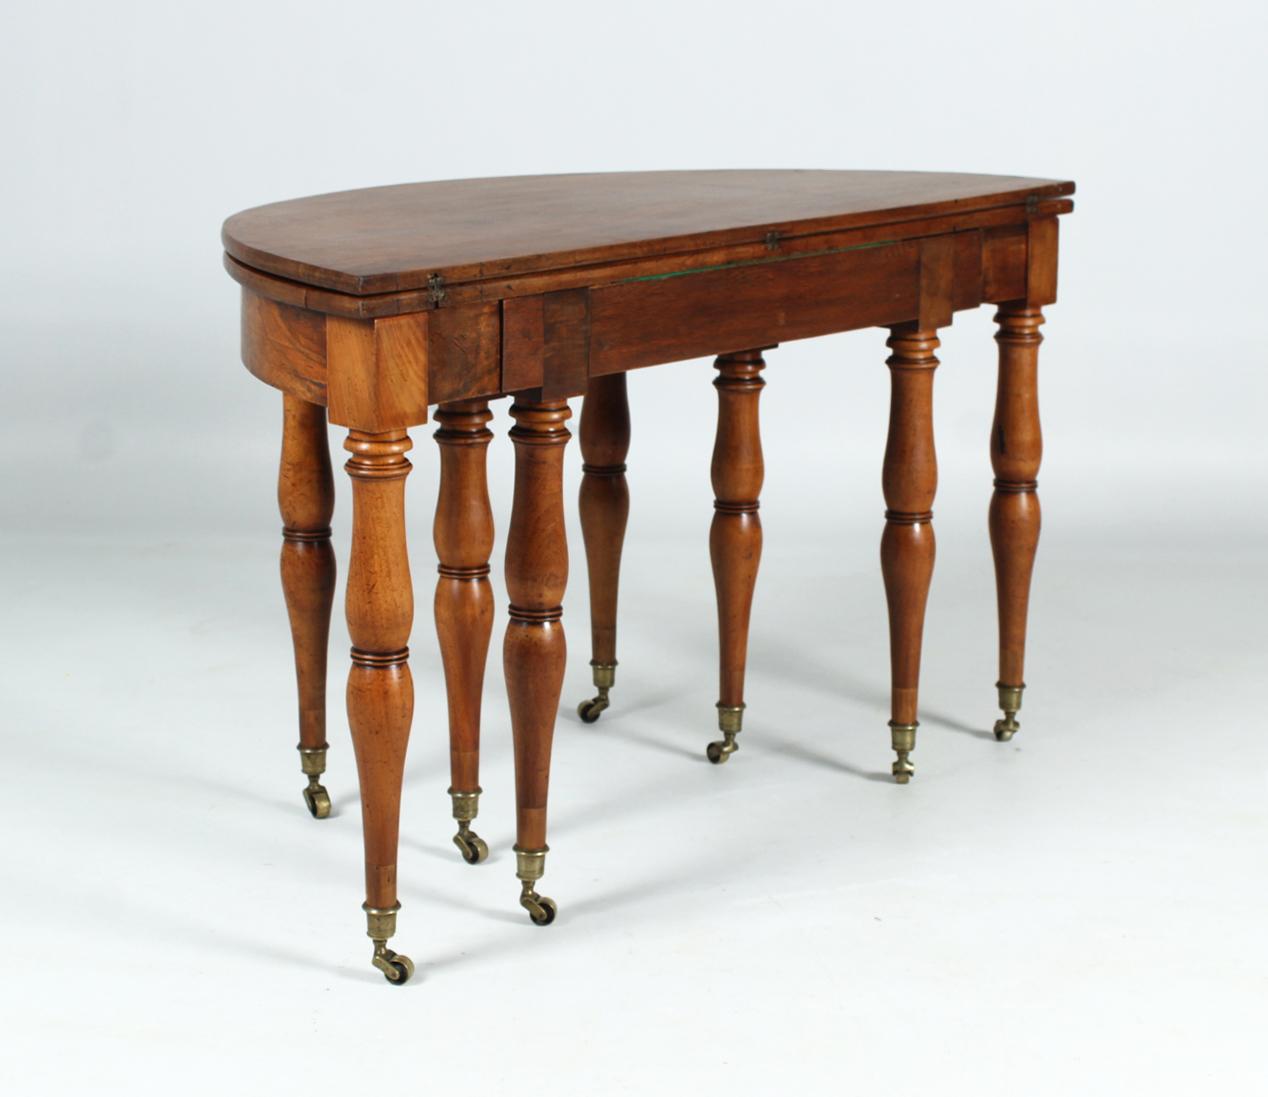 French Beautiful Patina Demi-Lune Dining Table, Walnut, Round, Extendable, c. 1860